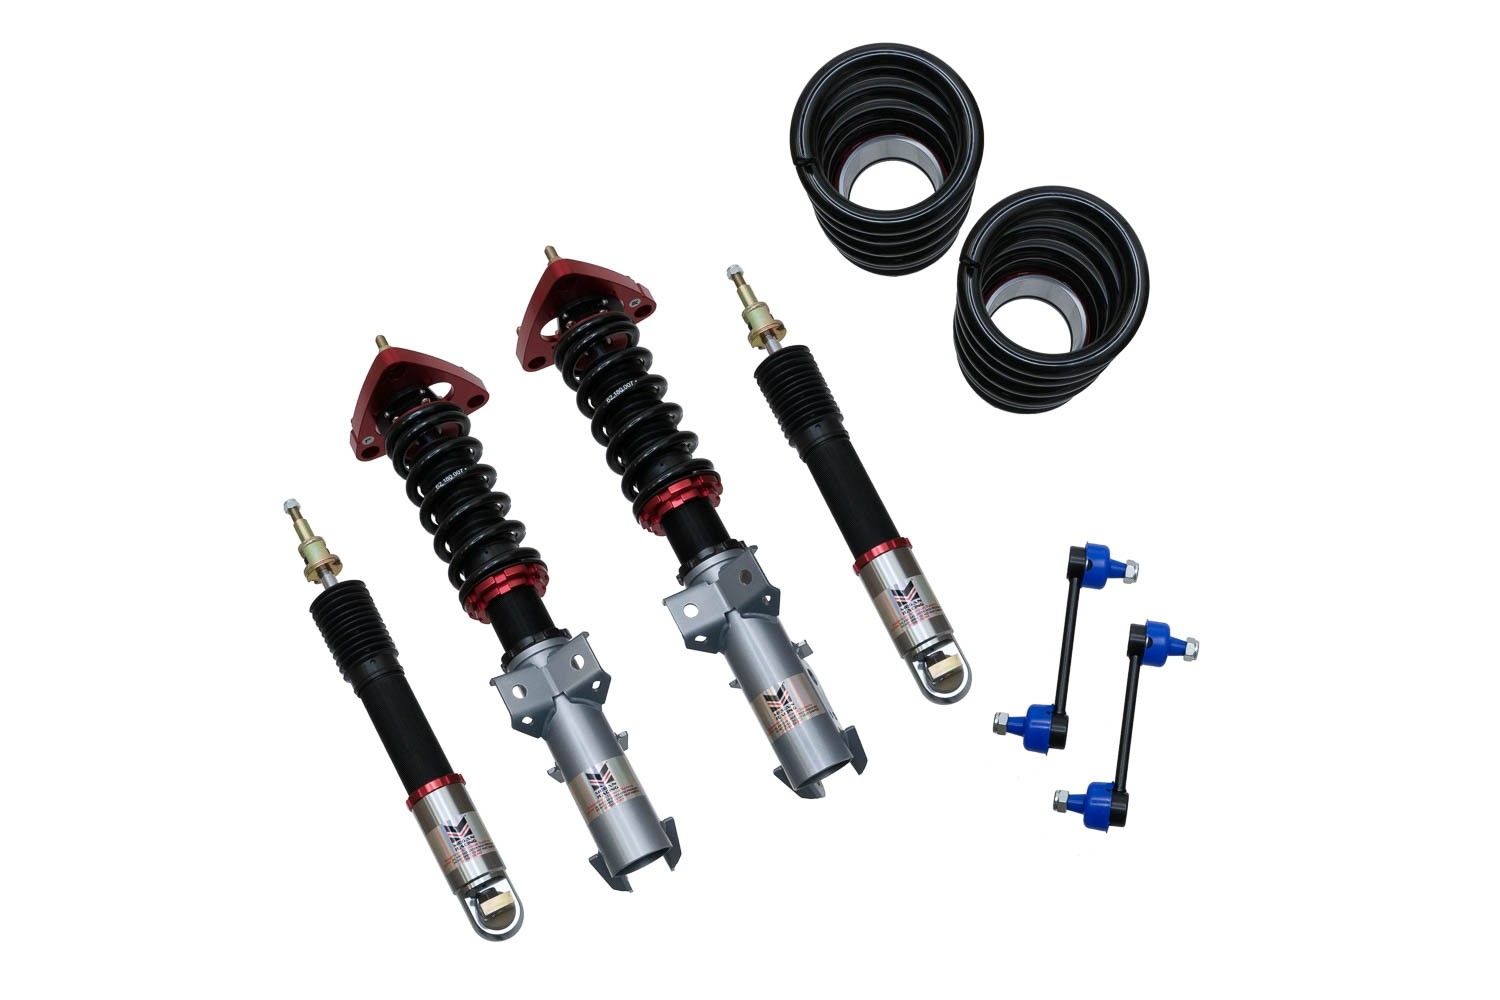 Ford Mustang Suspension Upgrades - Ford Mustang Upgrades